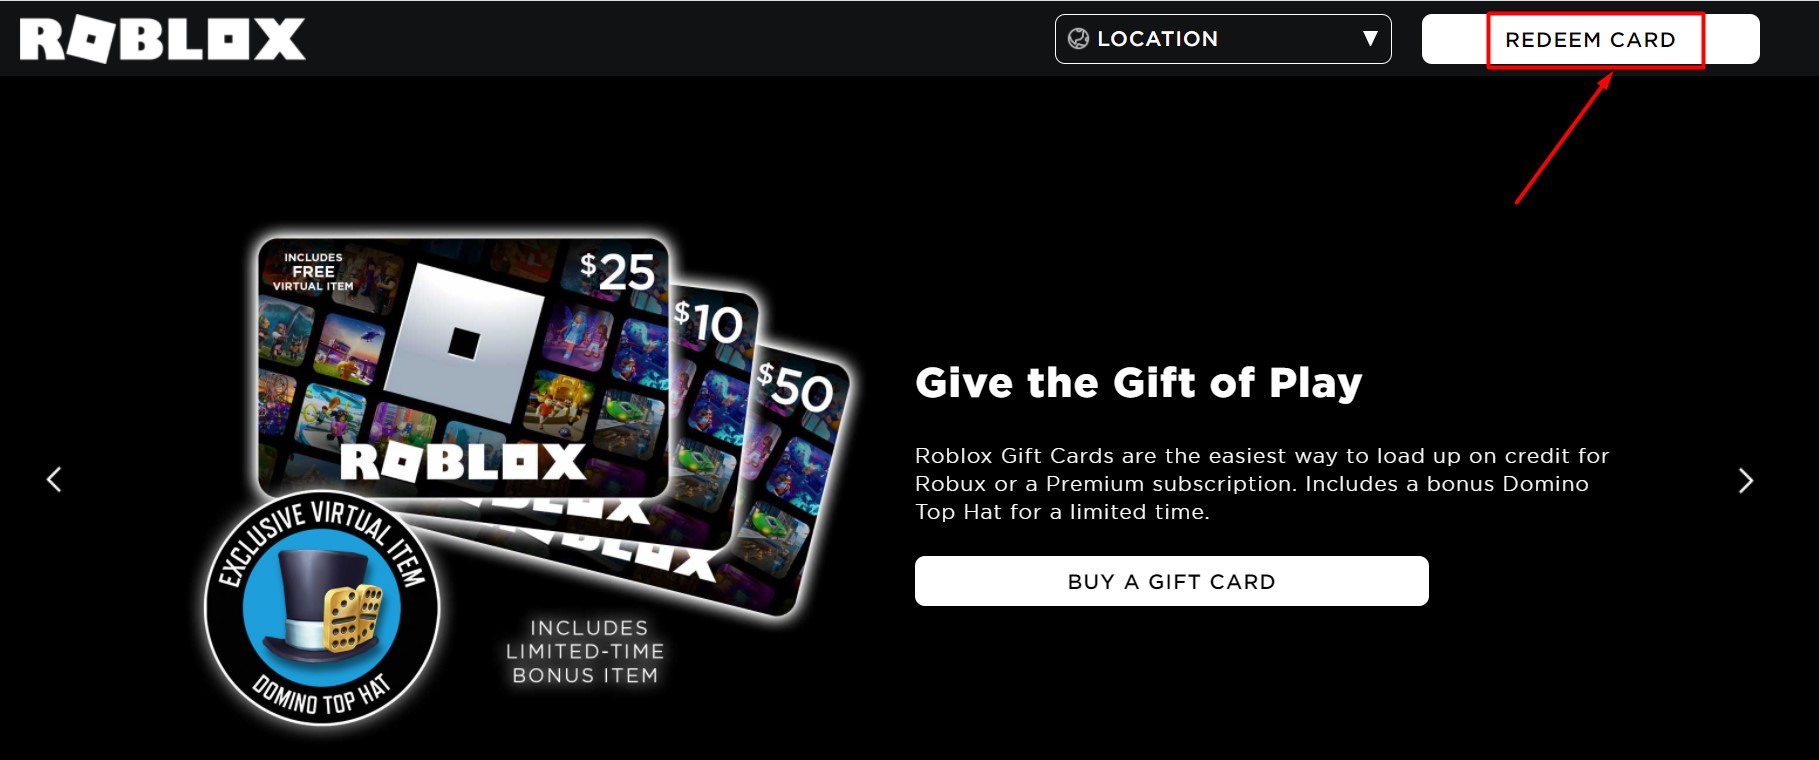 roblox gift card codes not redeemed 2019